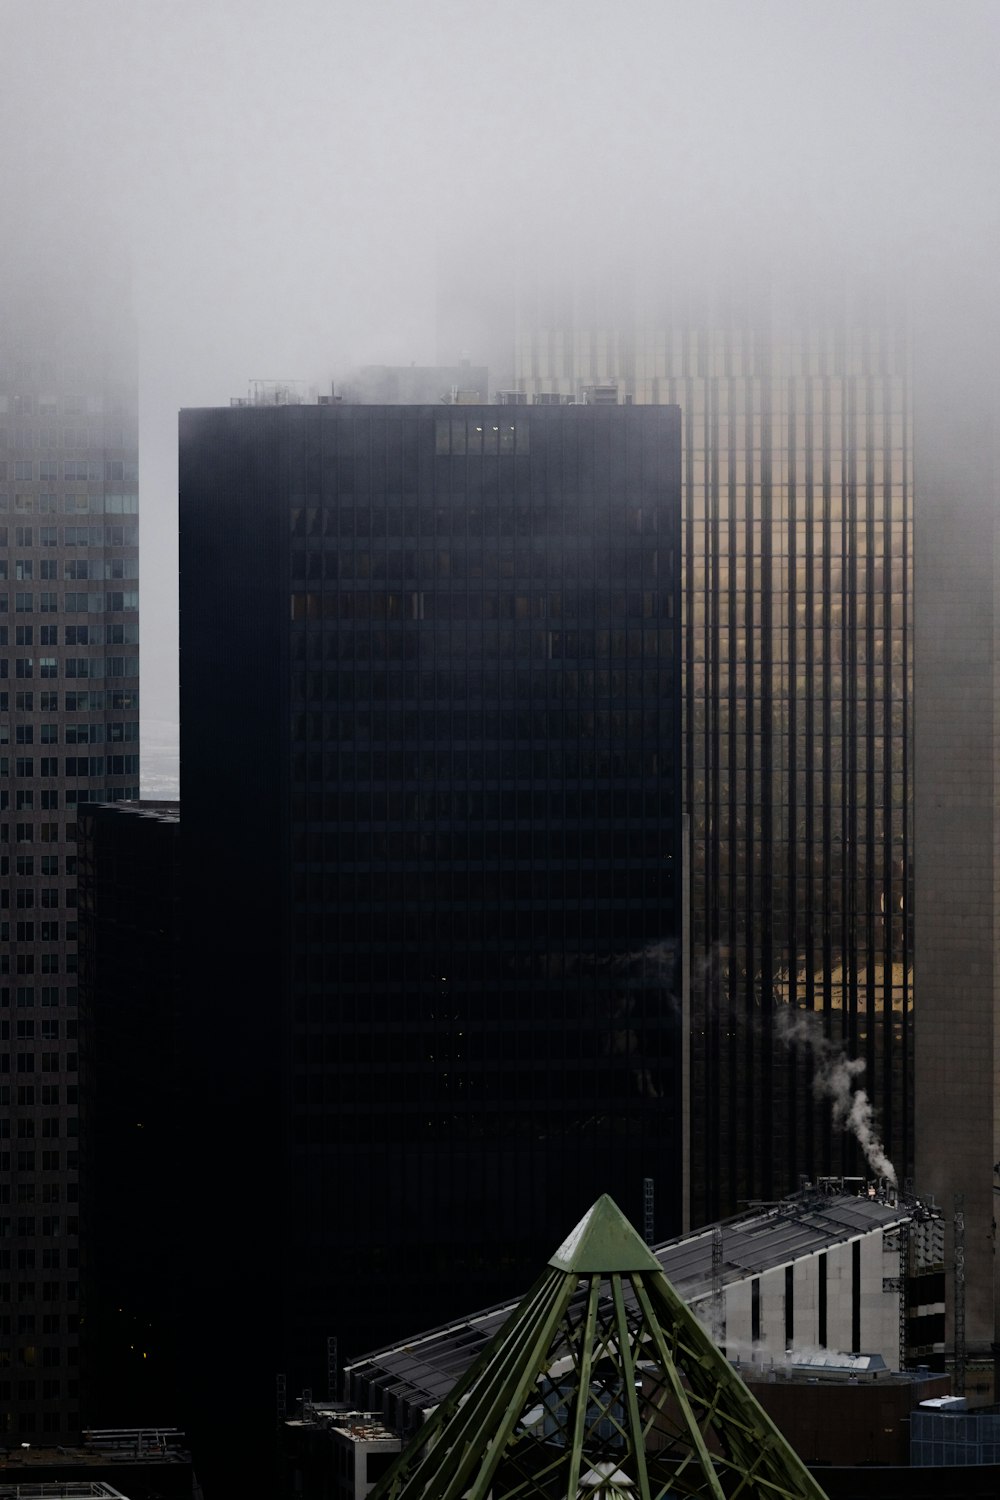 a view of a city with tall buildings in the fog